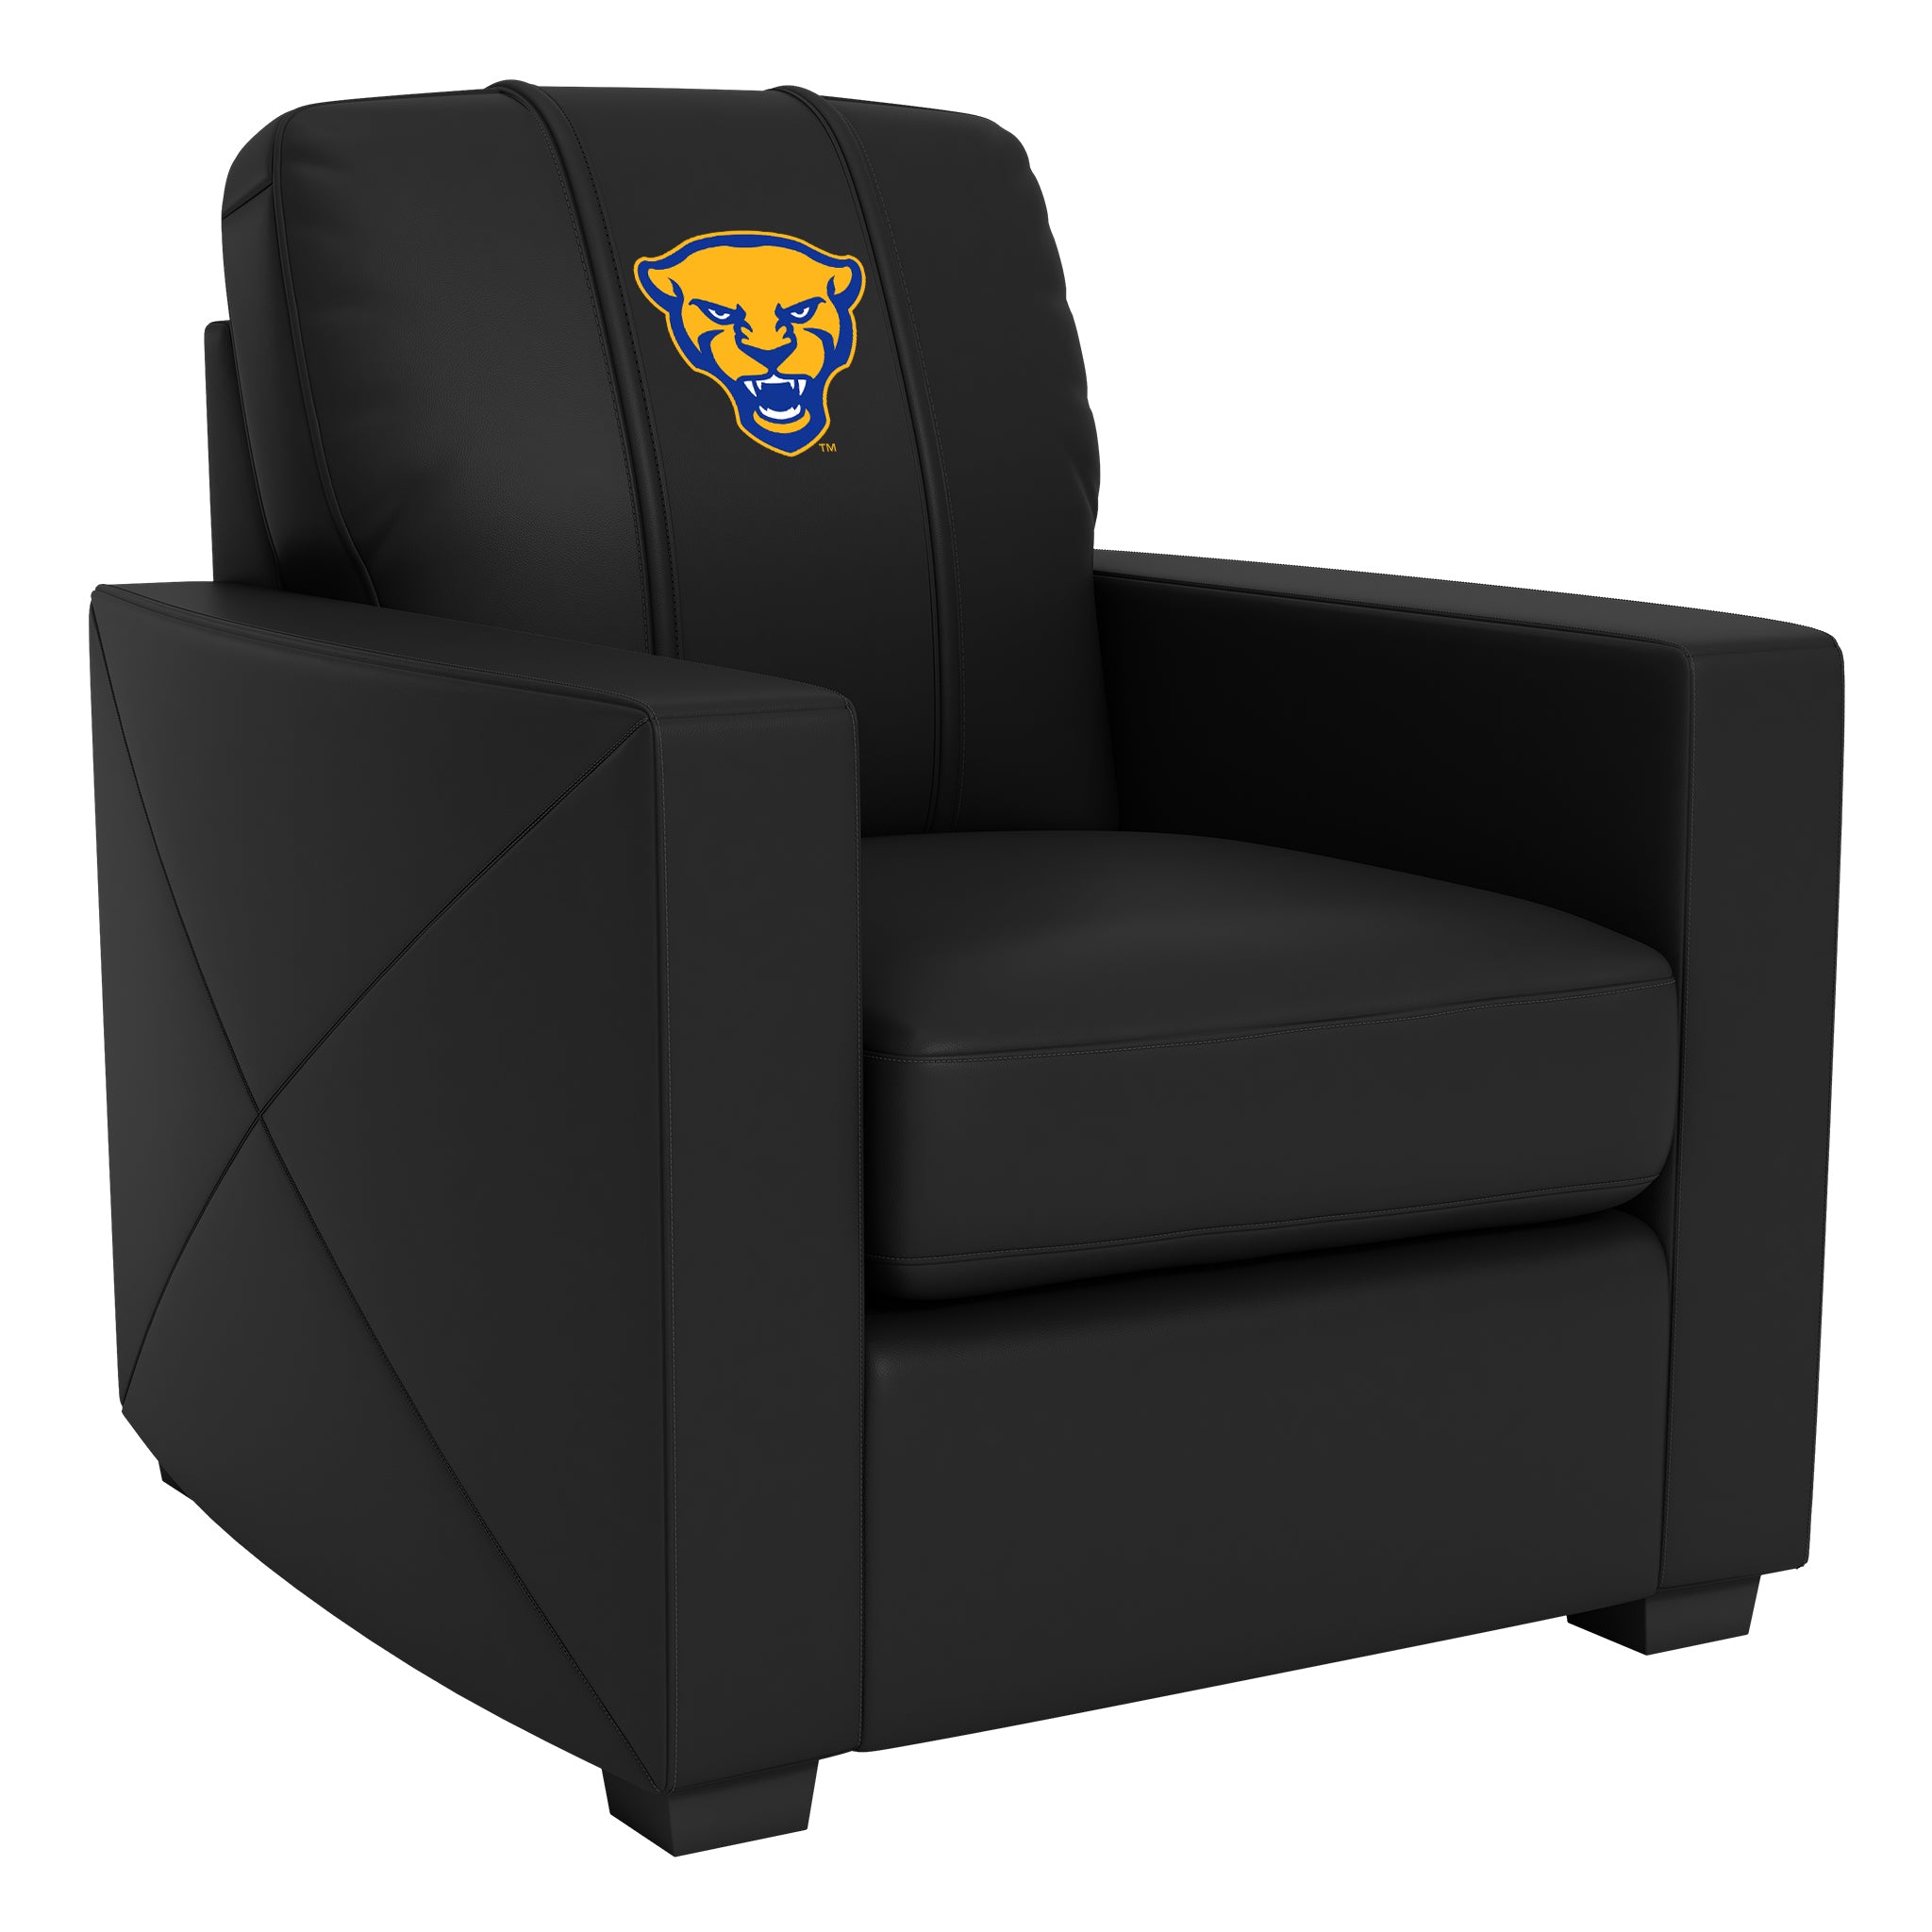 Pittsburgh Panthers Silver Club Chair with Pittsburgh Panthers Alternate Logo